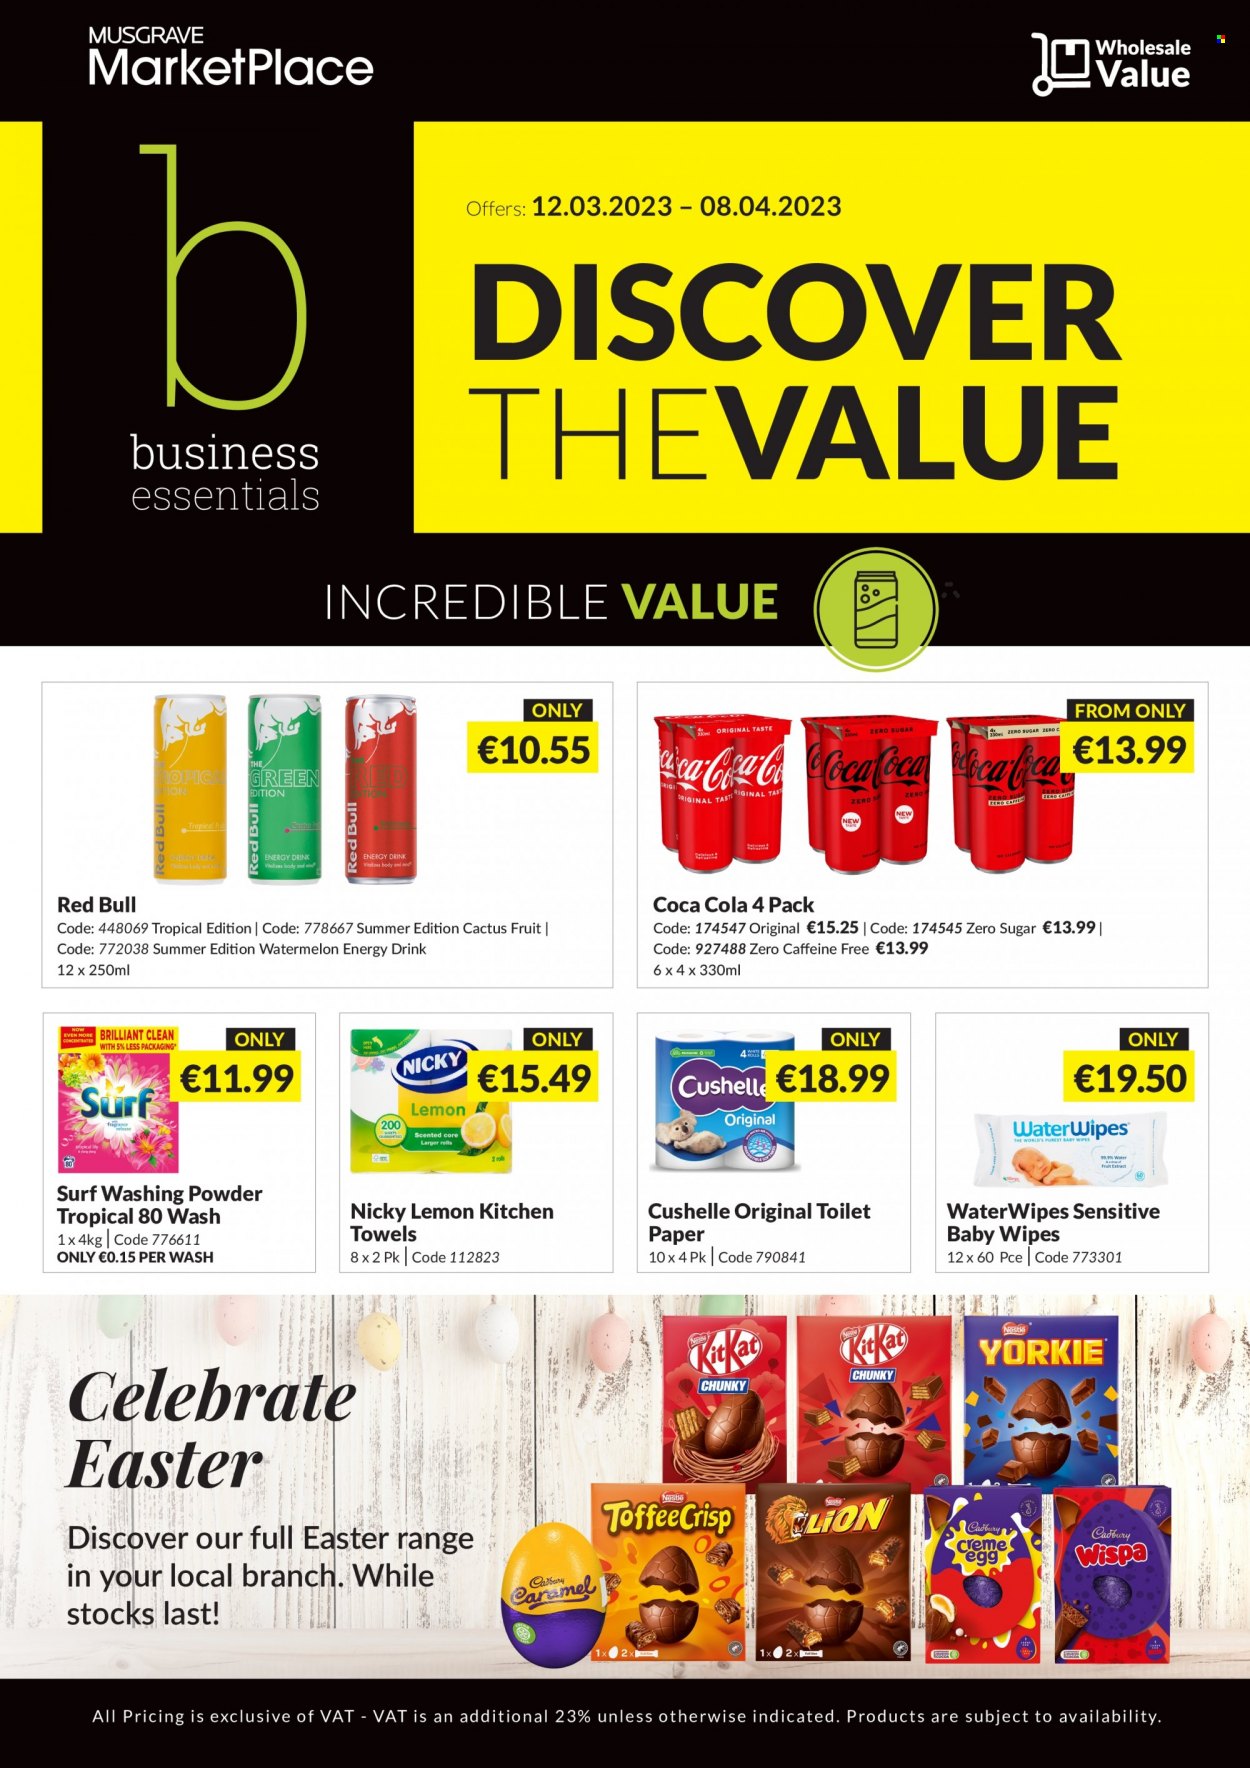 thumbnail - MUSGRAVE Market Place offer  - 12.03.2023 - 08.04.2023 - Sales products - watermelon, Coca-Cola, energy drink, Red Bull, wipes, baby wipes, toilet paper, kitchen towels, Cushelle, laundry powder, Surf, cactus. Page 1.